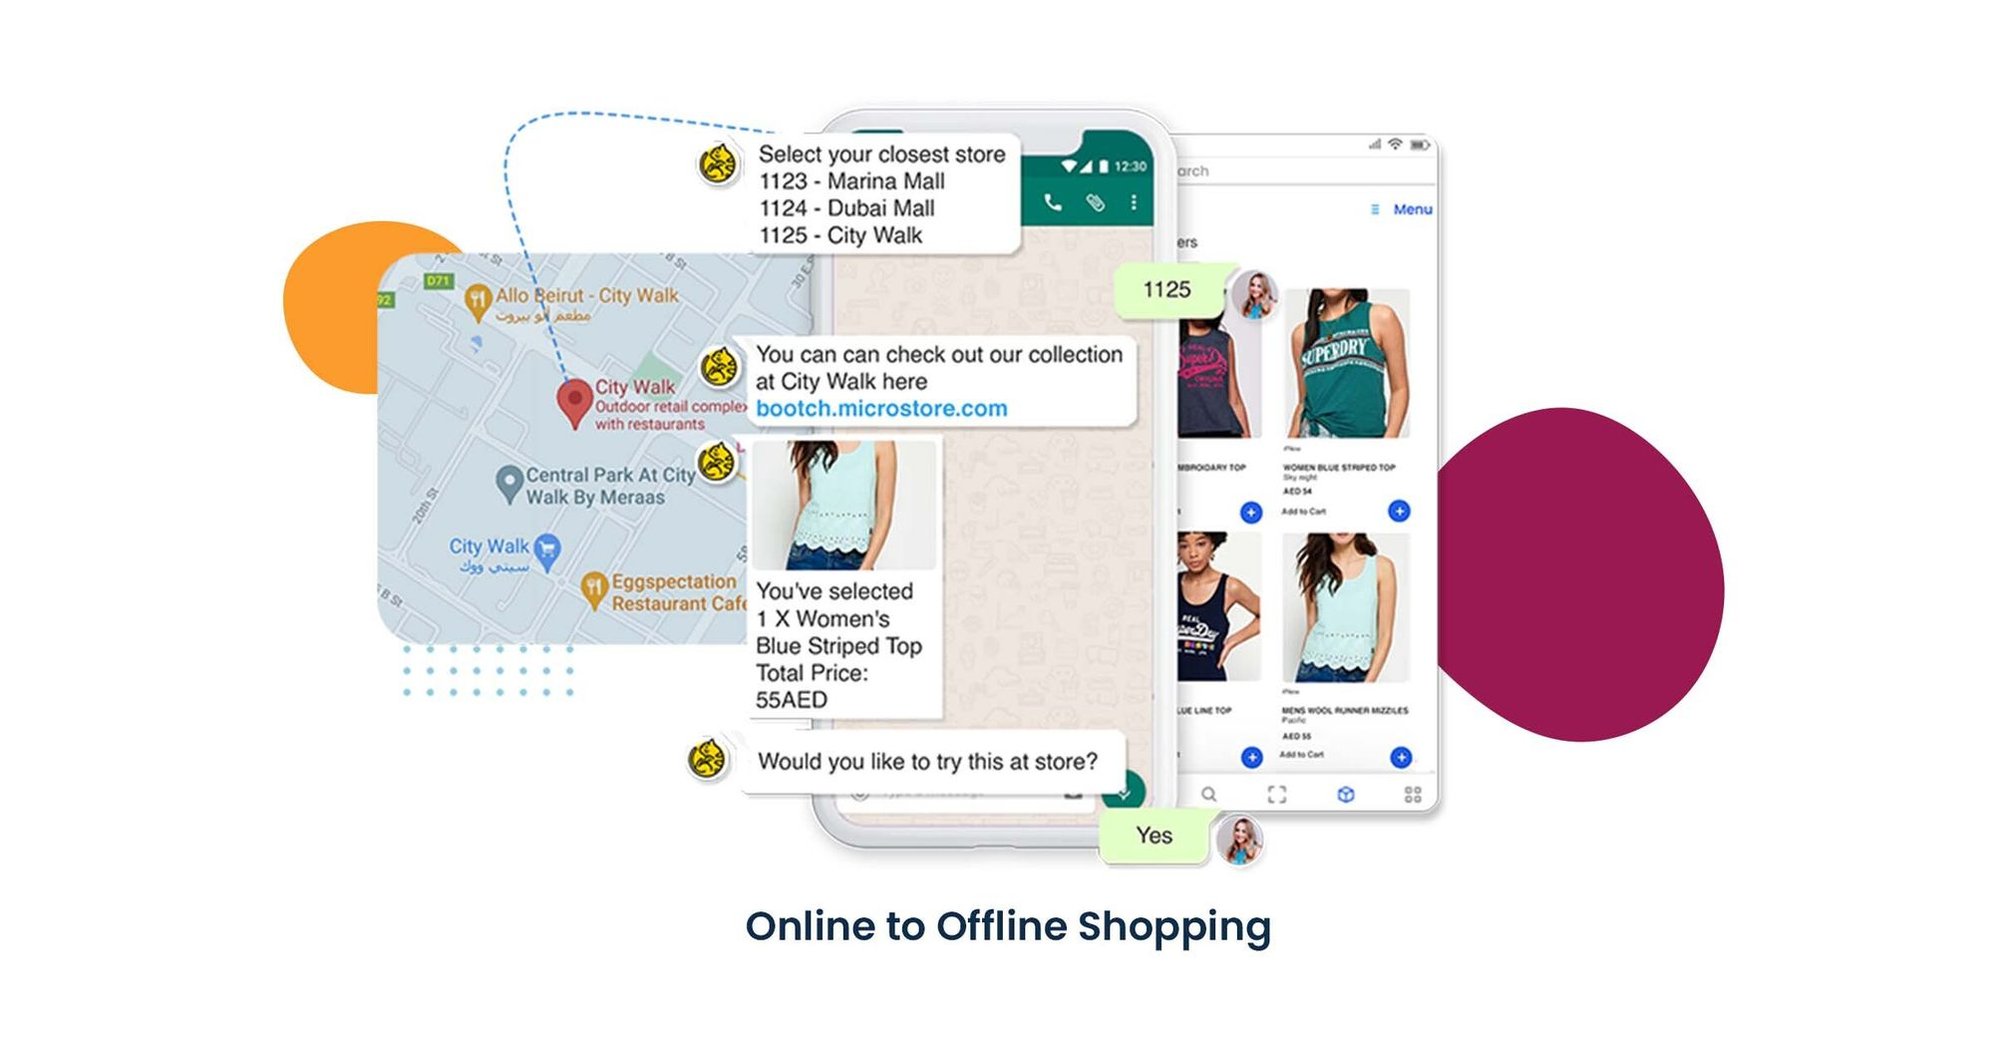 Online to offline shopping